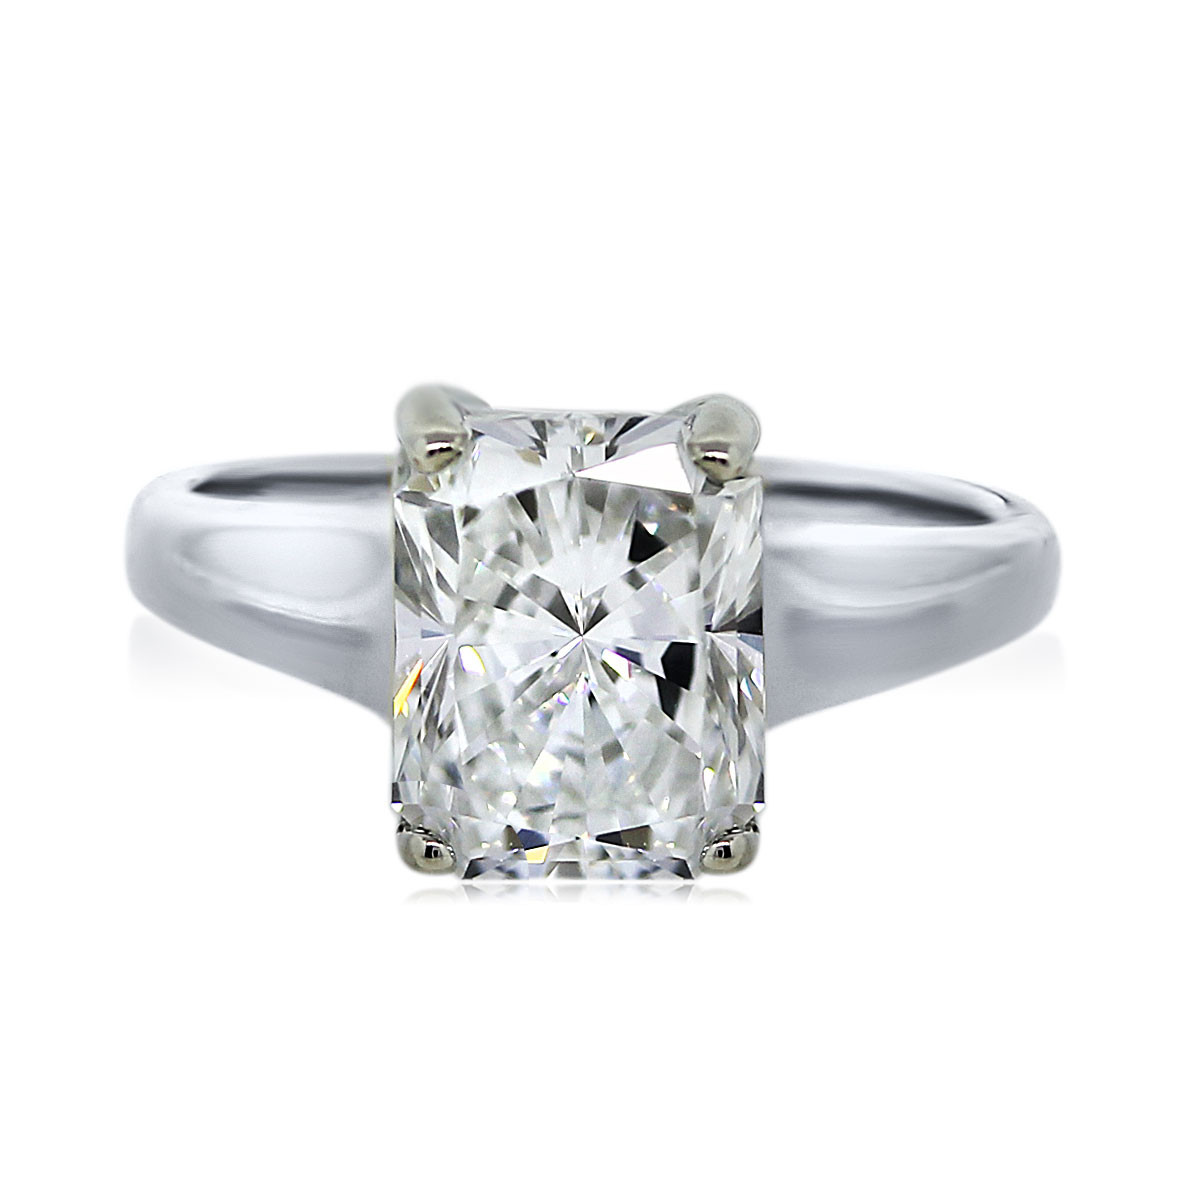 Radiant Cut Diamond Engagement Rings
 White Gold GIA Certified 2 00ct Radiant Cut Diamond